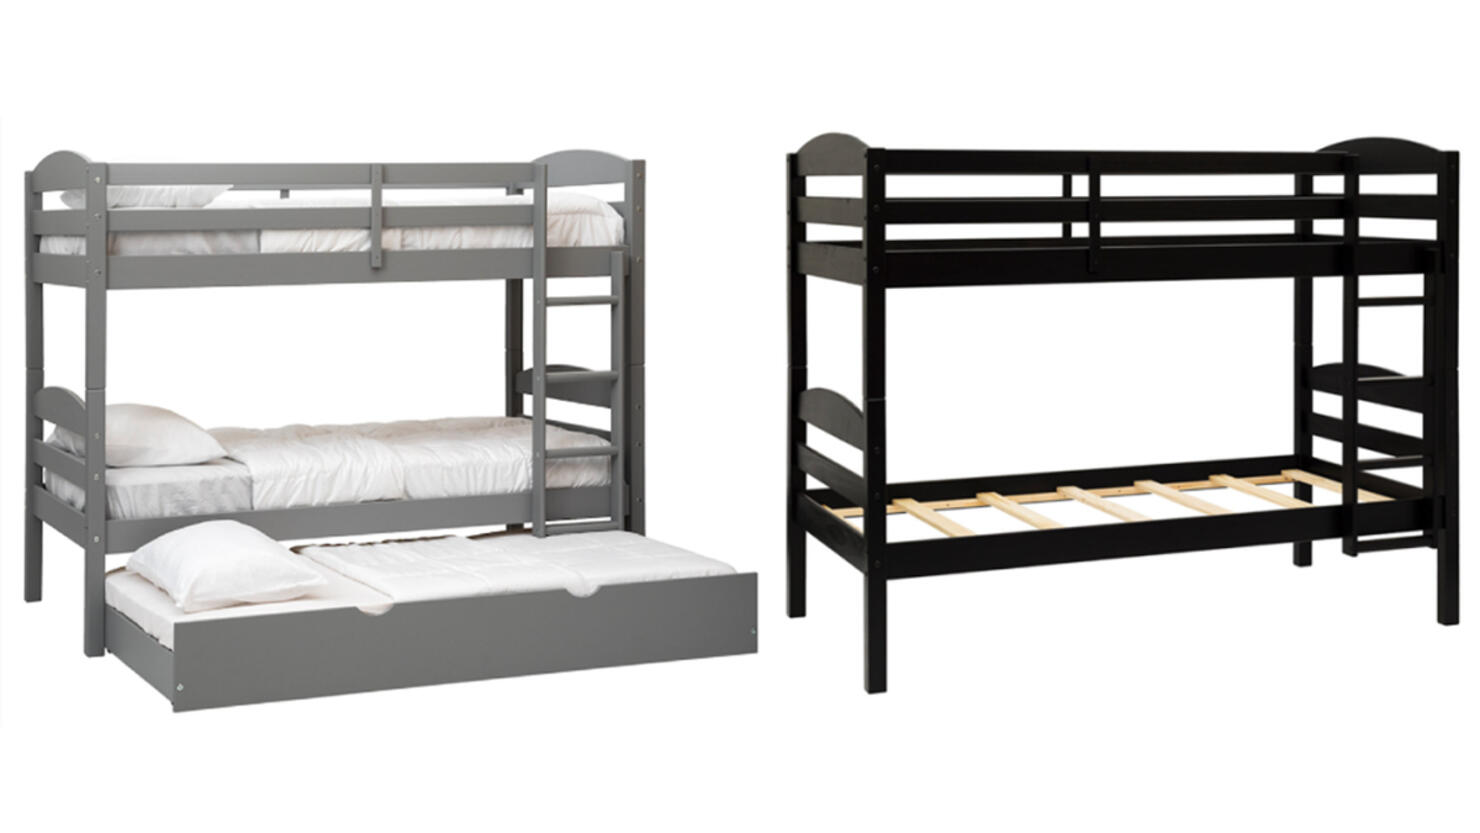 Over 120,000 Popular Children's Bunk Beds Recalled Because They Can ...